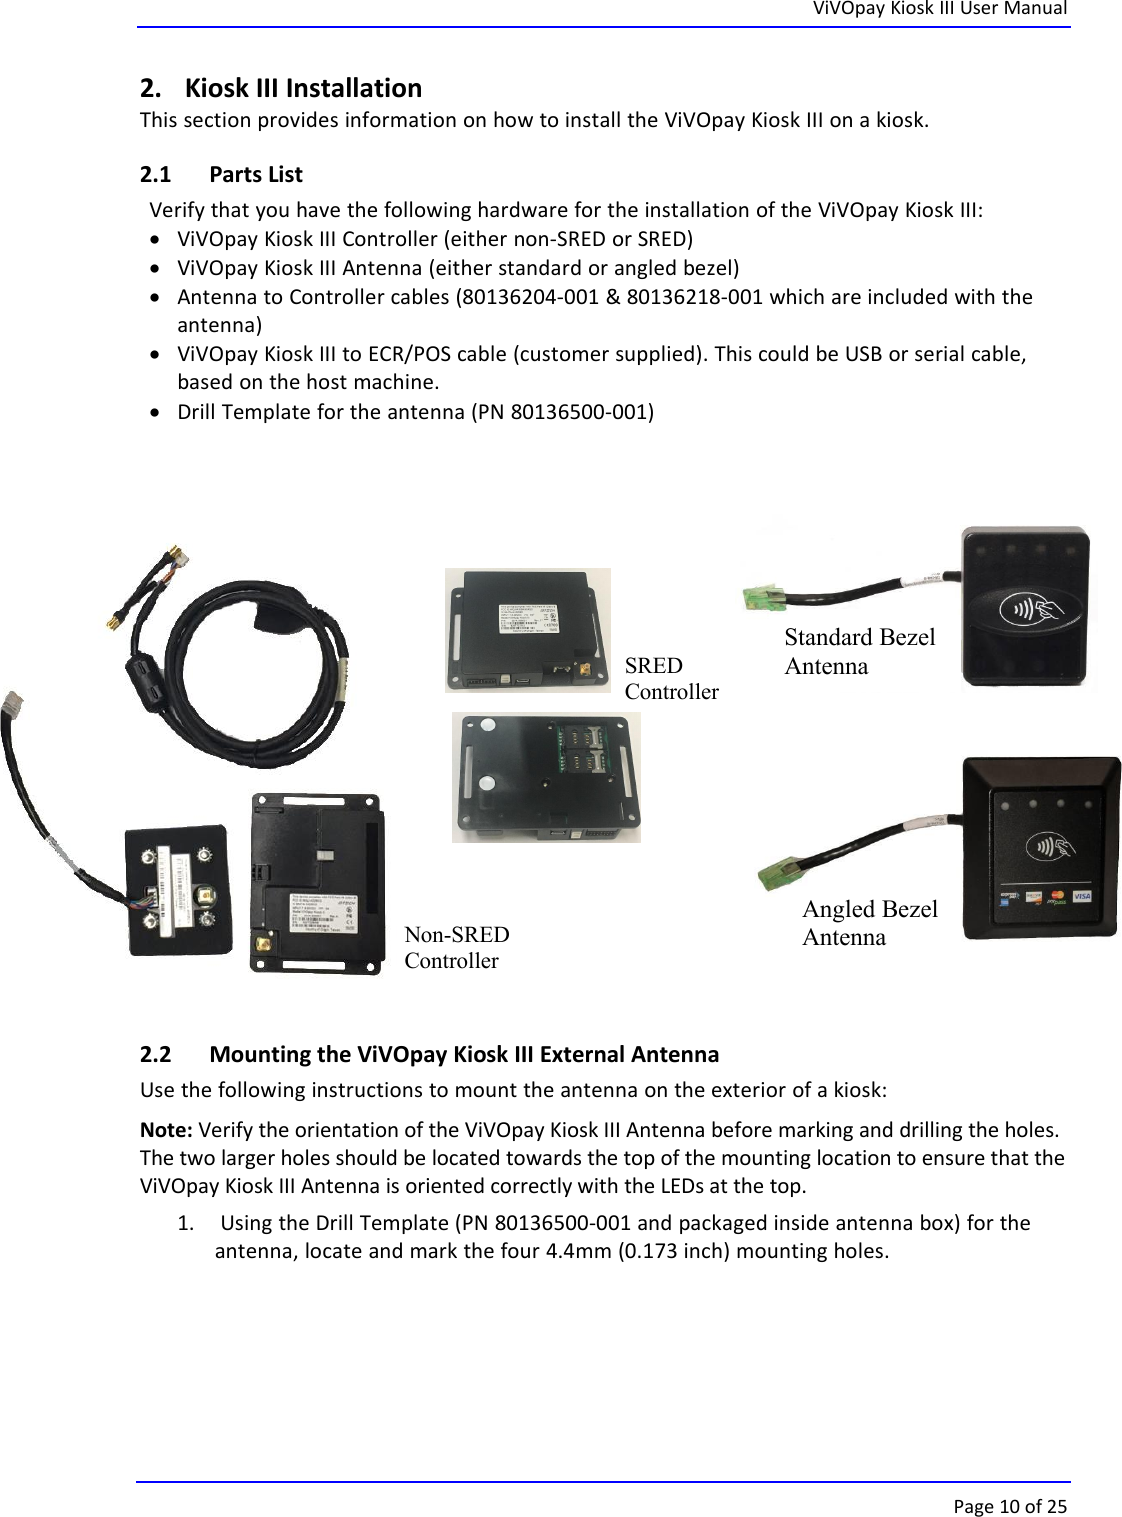 ViVOpay Kiosk III User ManualPage 10 of 252. Kiosk III InstallationThis section provides information on how to install the ViVOpay Kiosk III on a kiosk.2.1 Parts ListVerify that you have the following hardware for the installation of the ViVOpay Kiosk III:ViVOpay Kiosk III Controller (either non-SRED or SRED)ViVOpay Kiosk III Antenna (either standard or angled bezel)Antenna to Controller cables (80136204-001 &amp; 80136218-001 which are included with theantenna)ViVOpay Kiosk III to ECR/POS cable (customer supplied). This could be USB or serial cable,based on the host machine.Drill Template for the antenna (PN 80136500-001)2.2 Mounting the ViVOpay Kiosk III External AntennaUse the following instructions to mount the antenna on the exterior of a kiosk:Note: Verify the orientation of the ViVOpay Kiosk III Antenna before marking and drilling the holes.The two larger holes should be located towards the top of the mounting location to ensure that theViVOpay Kiosk III Antenna is oriented correctly with the LEDs at the top.1. Using the Drill Template (PN 80136500-001 and packaged inside antenna box) for theantenna, locate and mark the four 4.4mm (0.173 inch) mounting holes.Standard BezelAntennaAngled BezelAntennaSREDControllerNon-SREDController